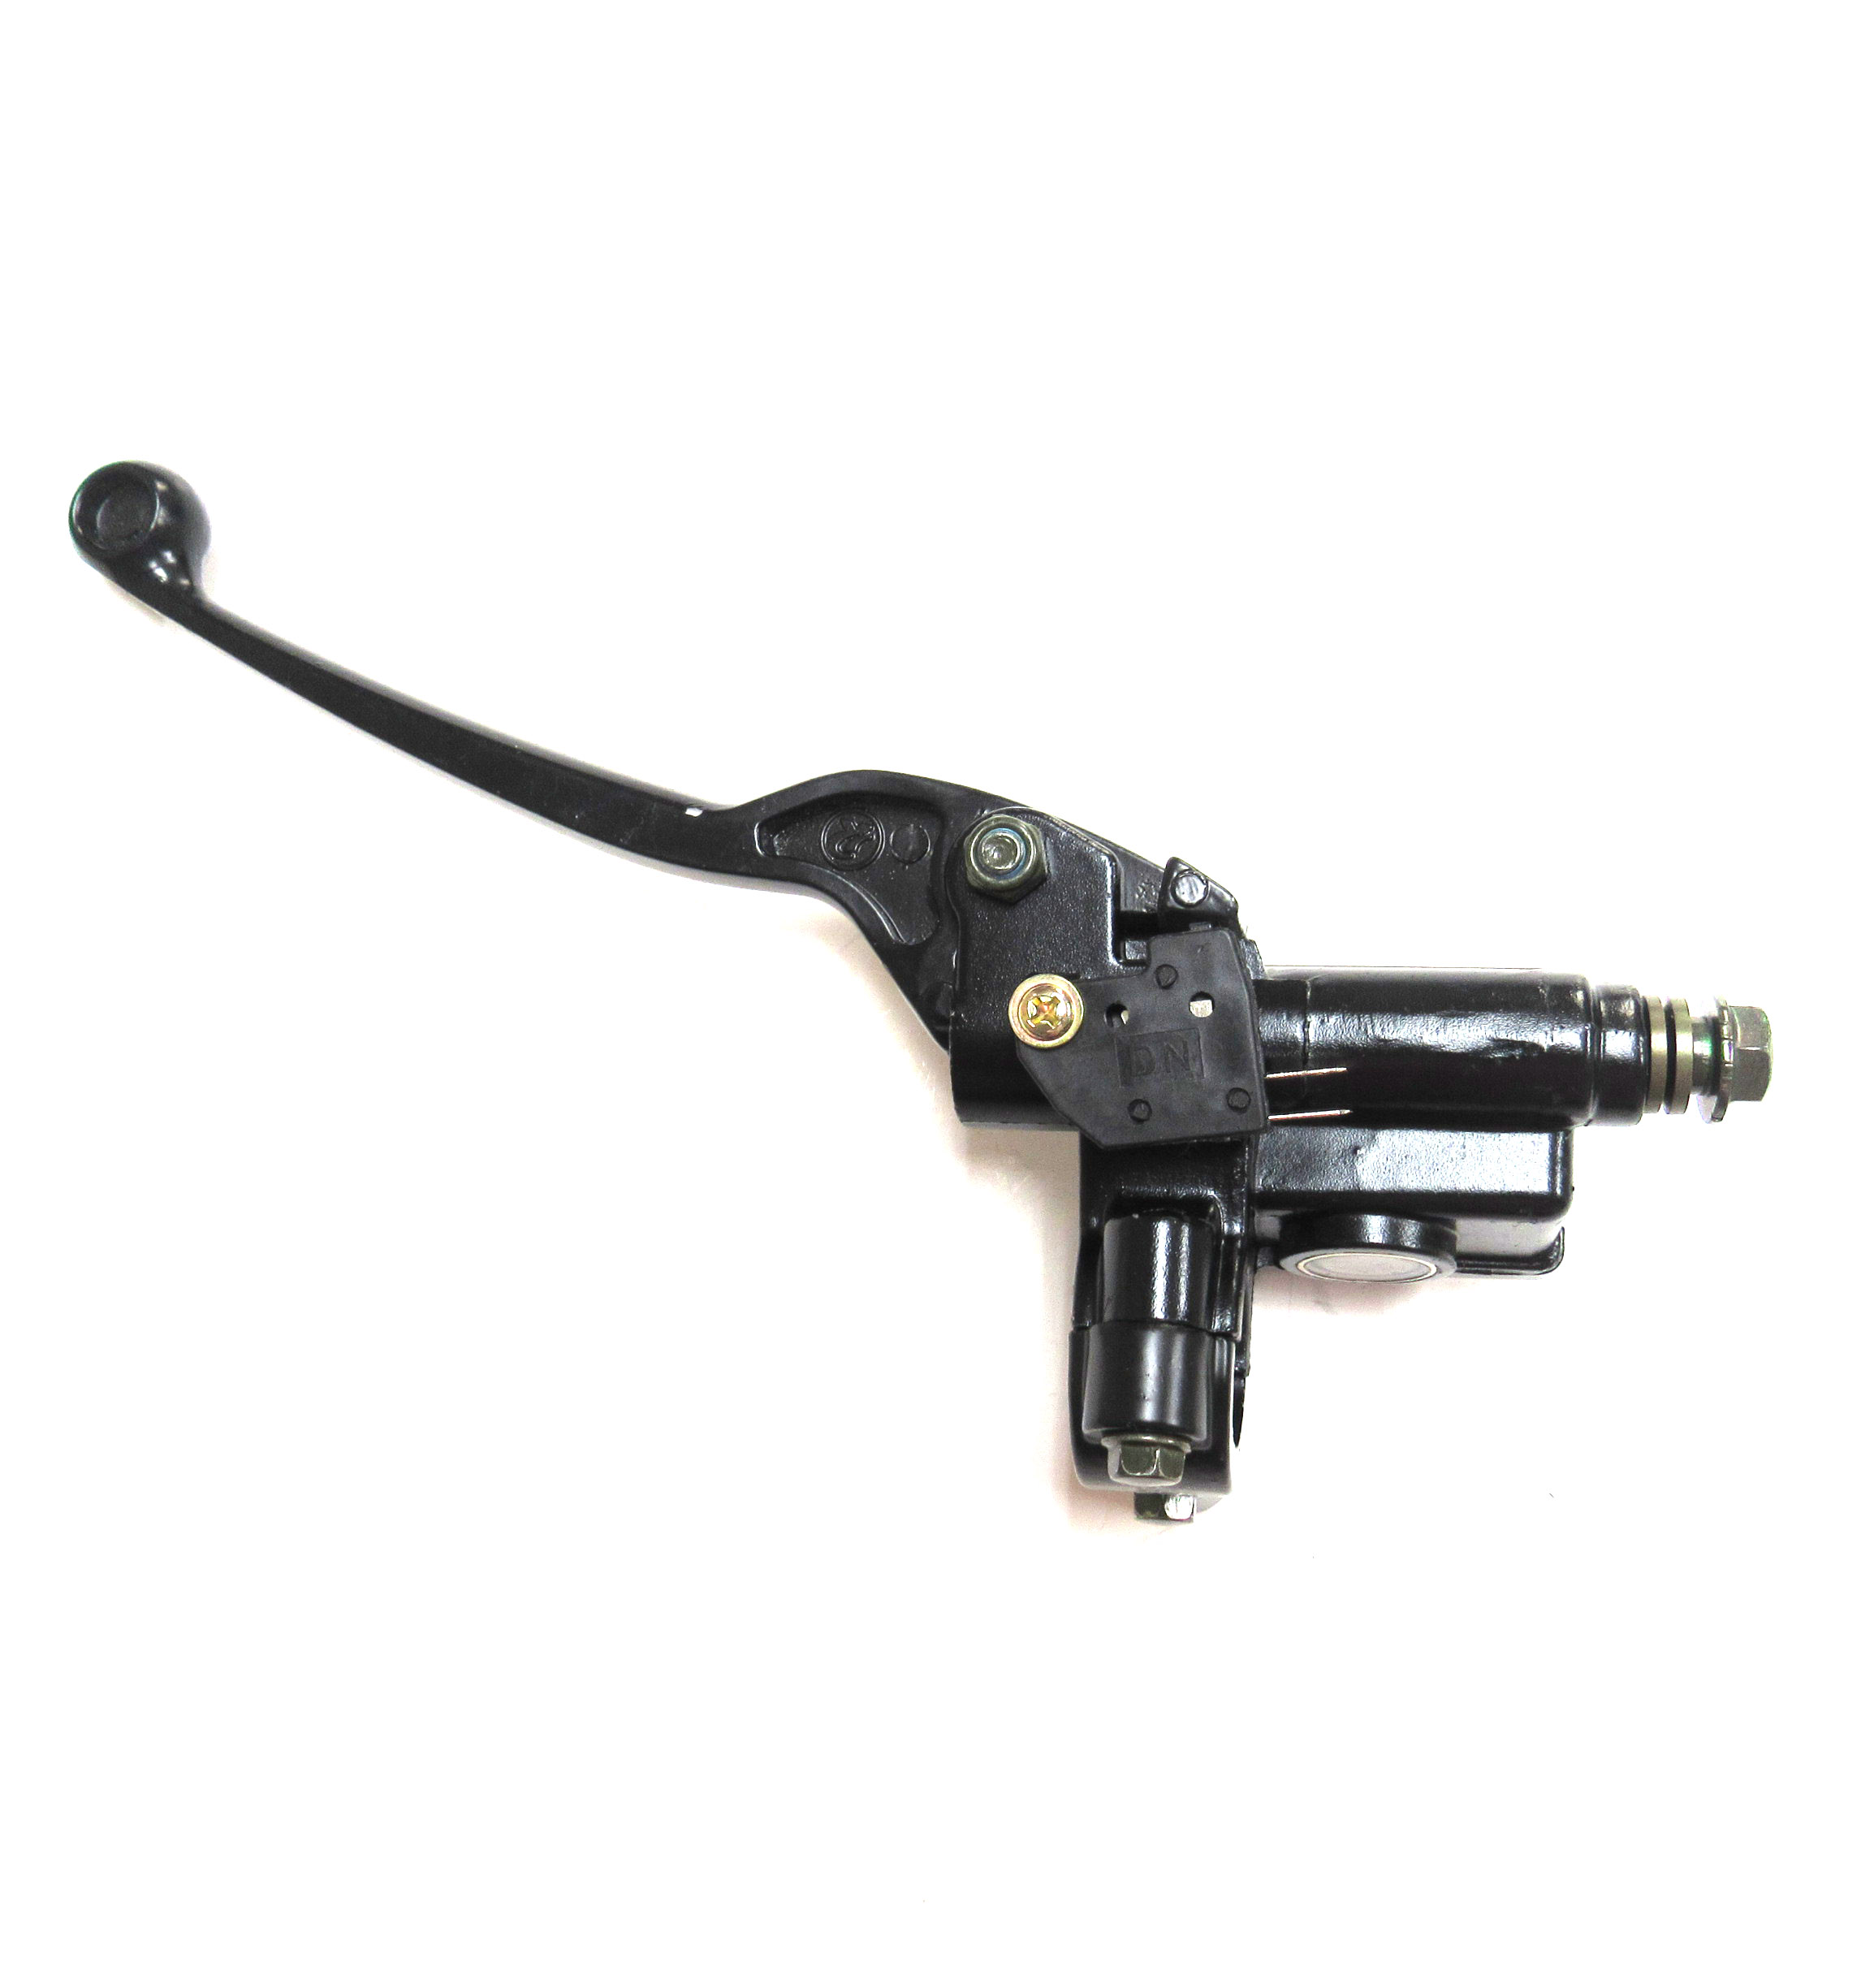 RIGHT SIDE FRONT BRAKE LEVER & MASTER CYLINDER w/8mm MIRROR MOUNT Fits Many 49-150cc Scooters - Click Image to Close